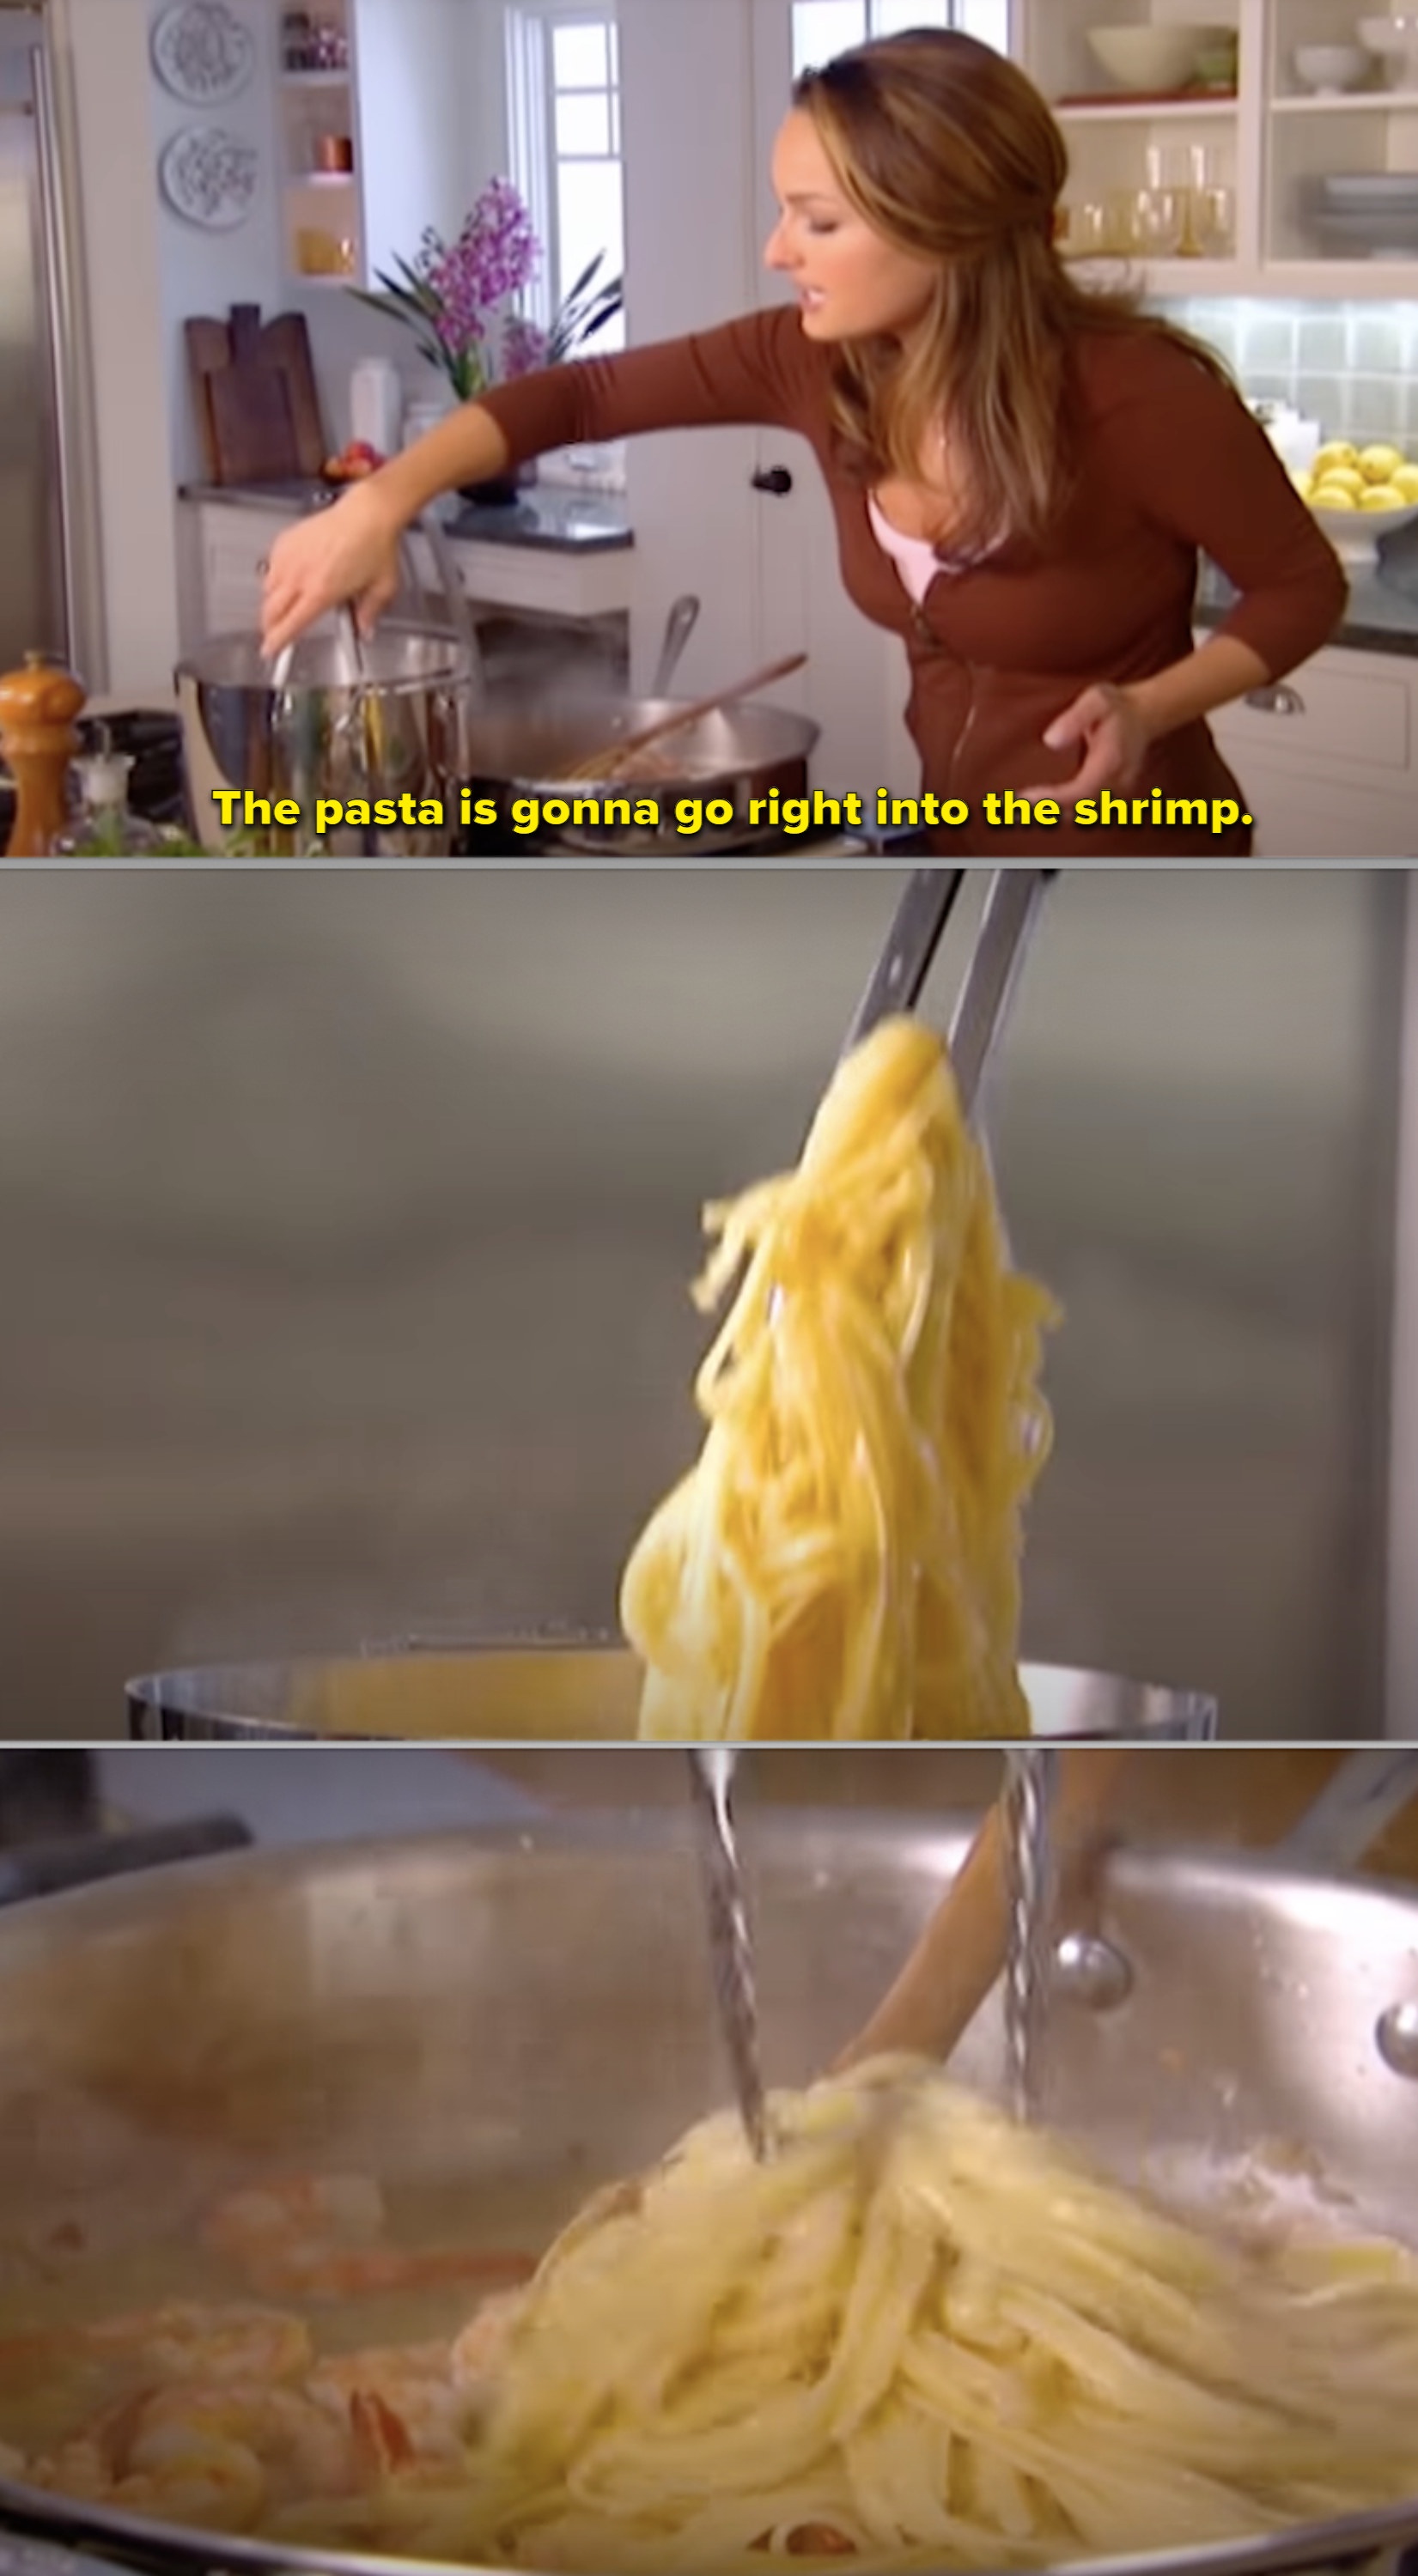 Giada De Laurentiis cooking pasta and saying the pasta is going right into the shrimp